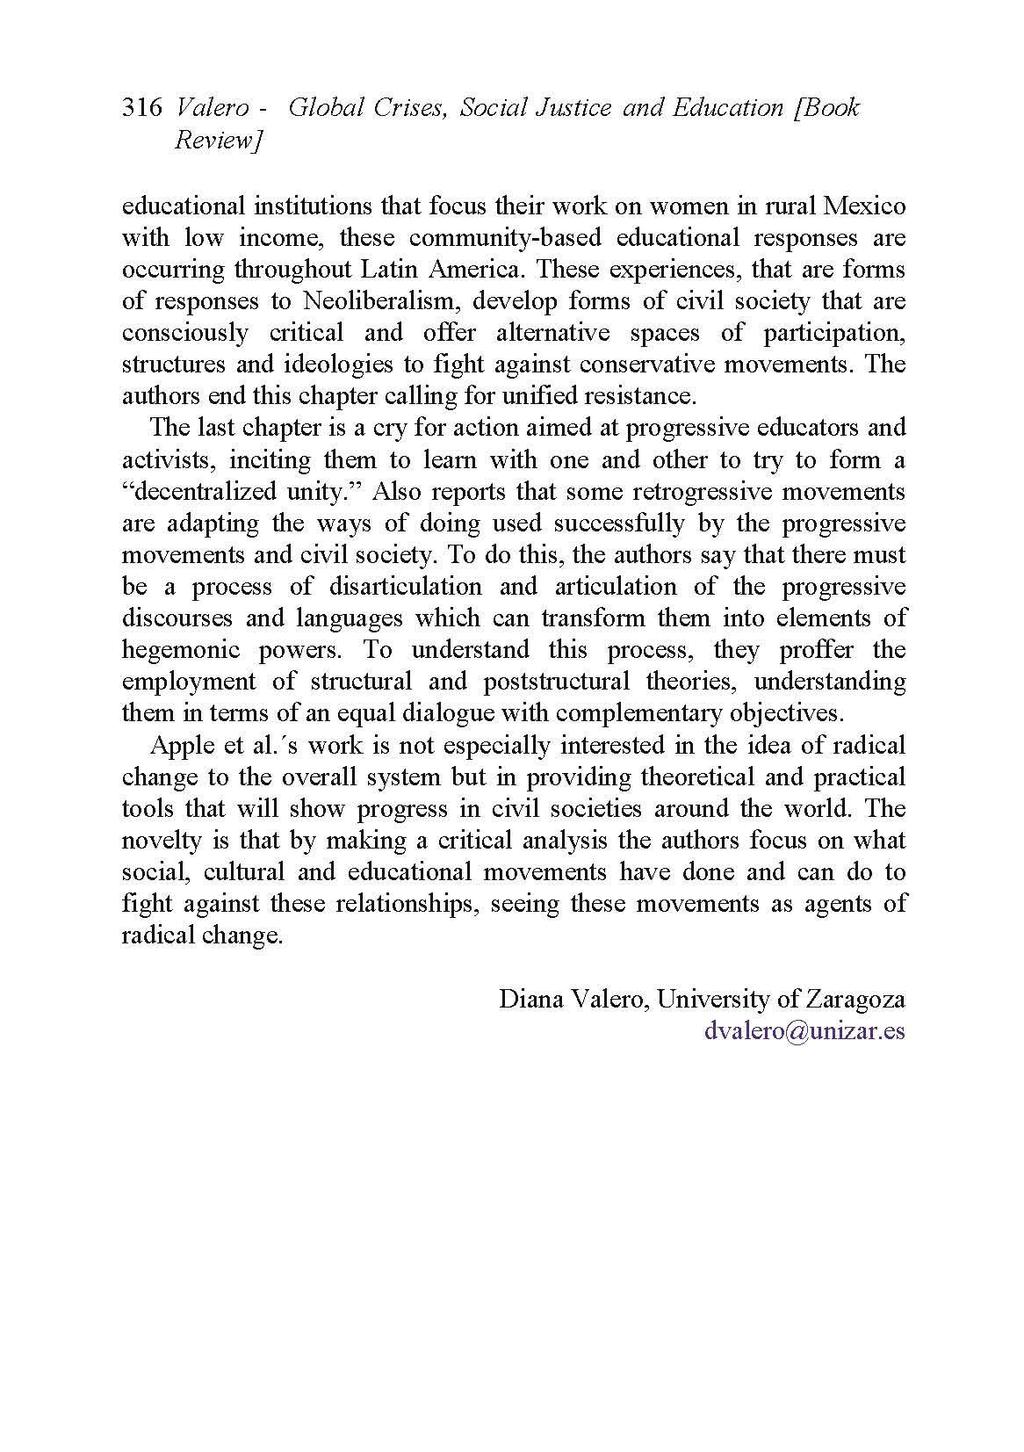 316 Valero - Global Crises, Social Justice and Education [Book Review} educational institutions that focus their work on women in rural Mexico with low income, these community-based educational